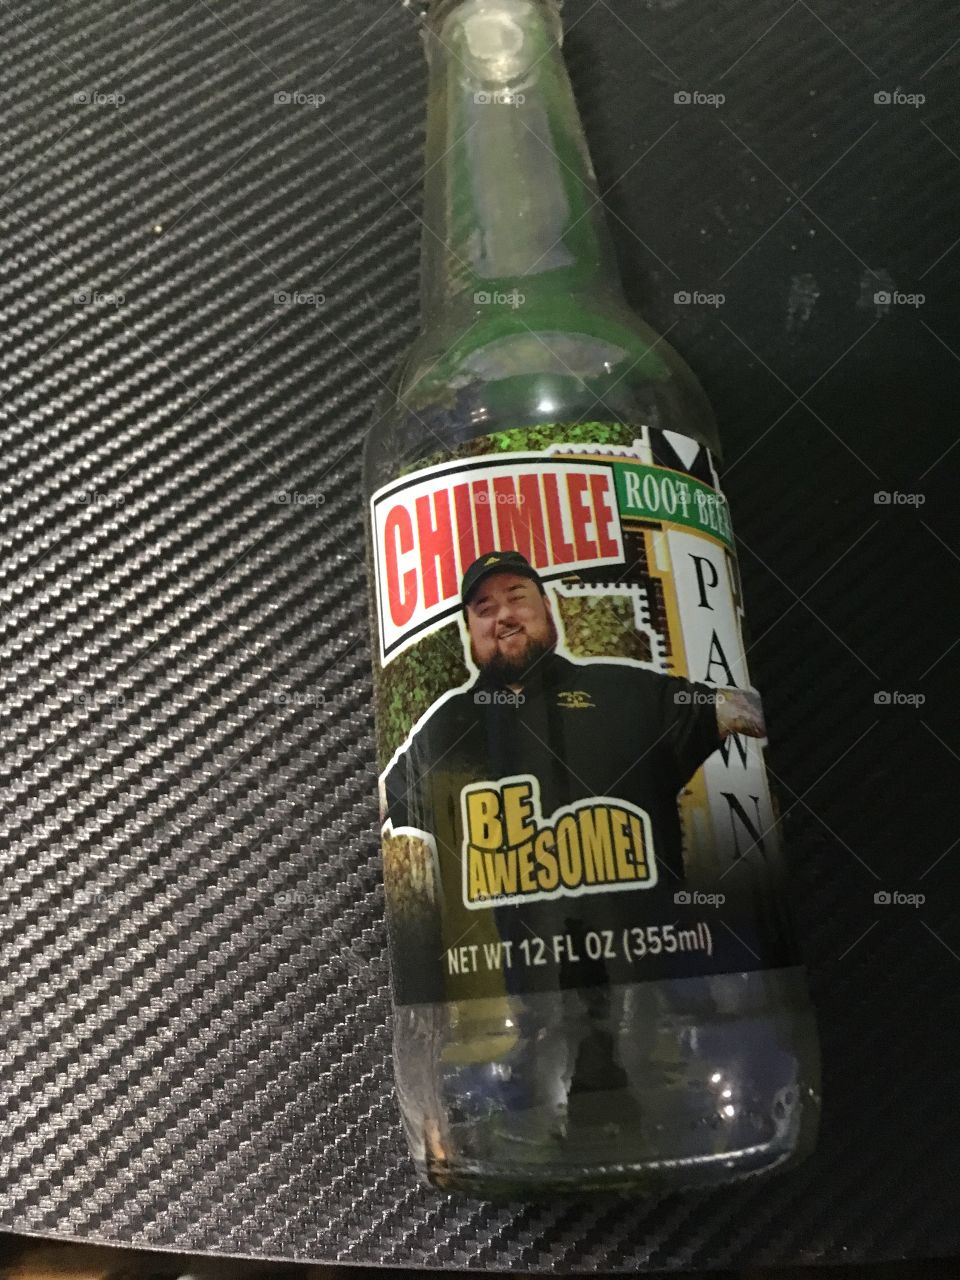 Pawn stars root beer chumlee